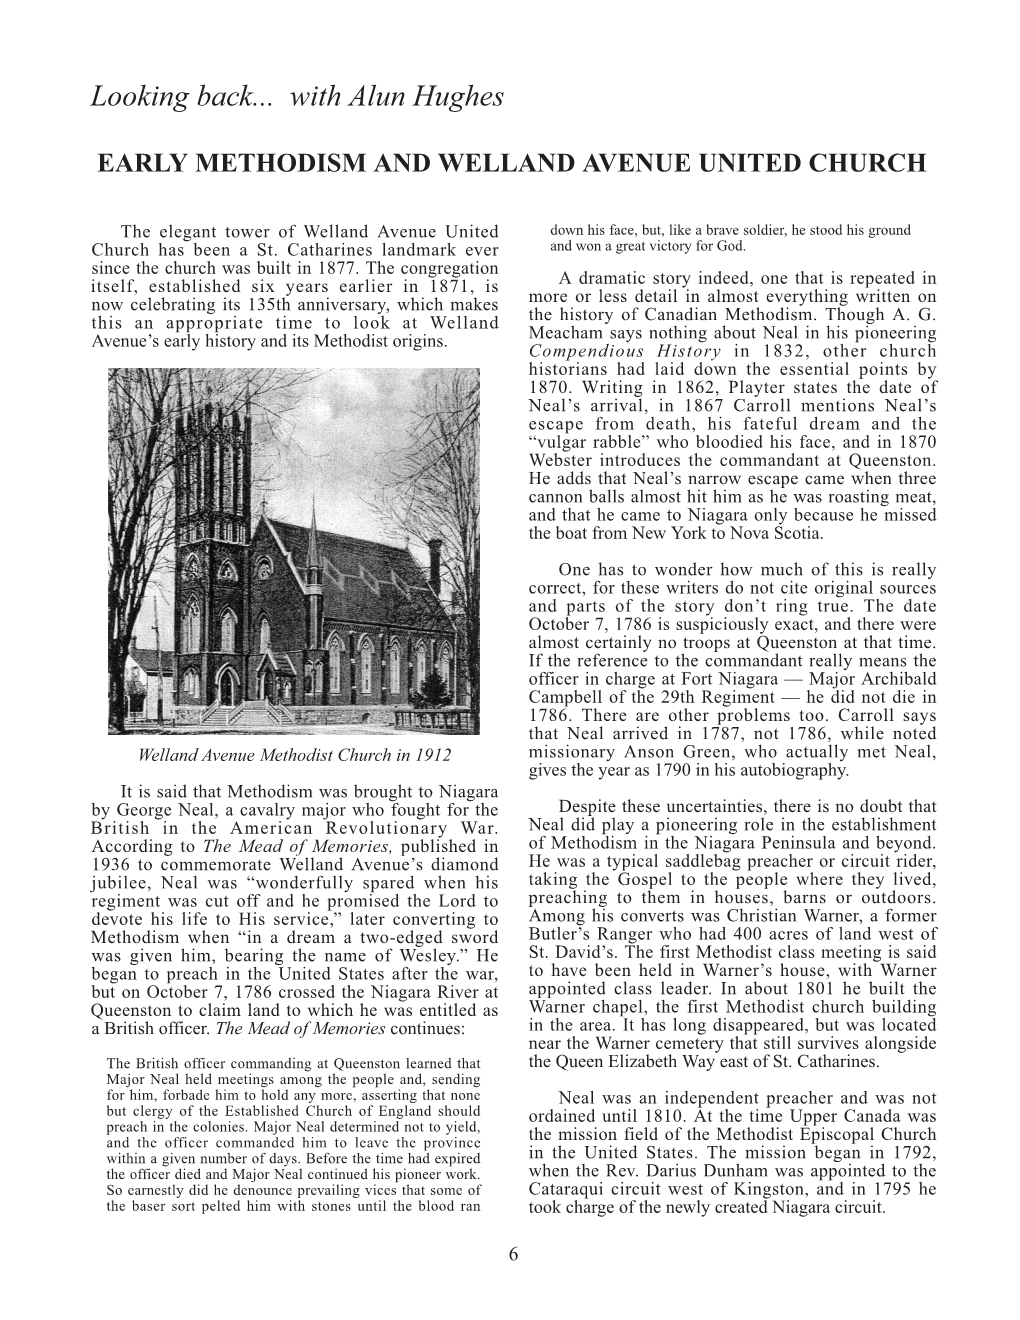 Early Methodism and Welland Avenue United Church